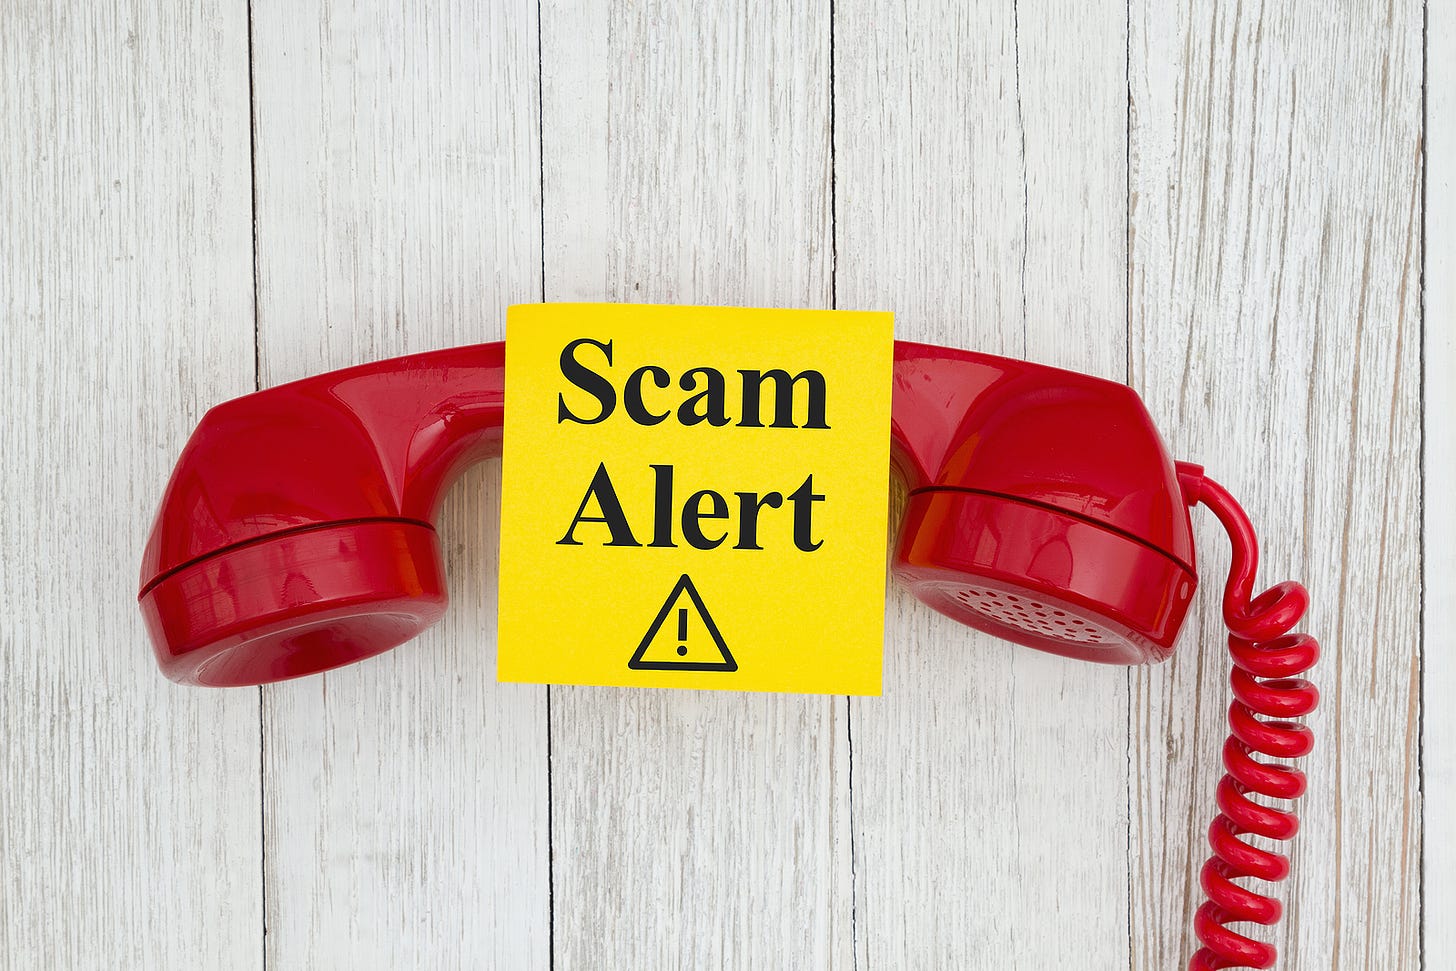 Scam Alert: Watch Out for these COVID-19 Scams - NFCC